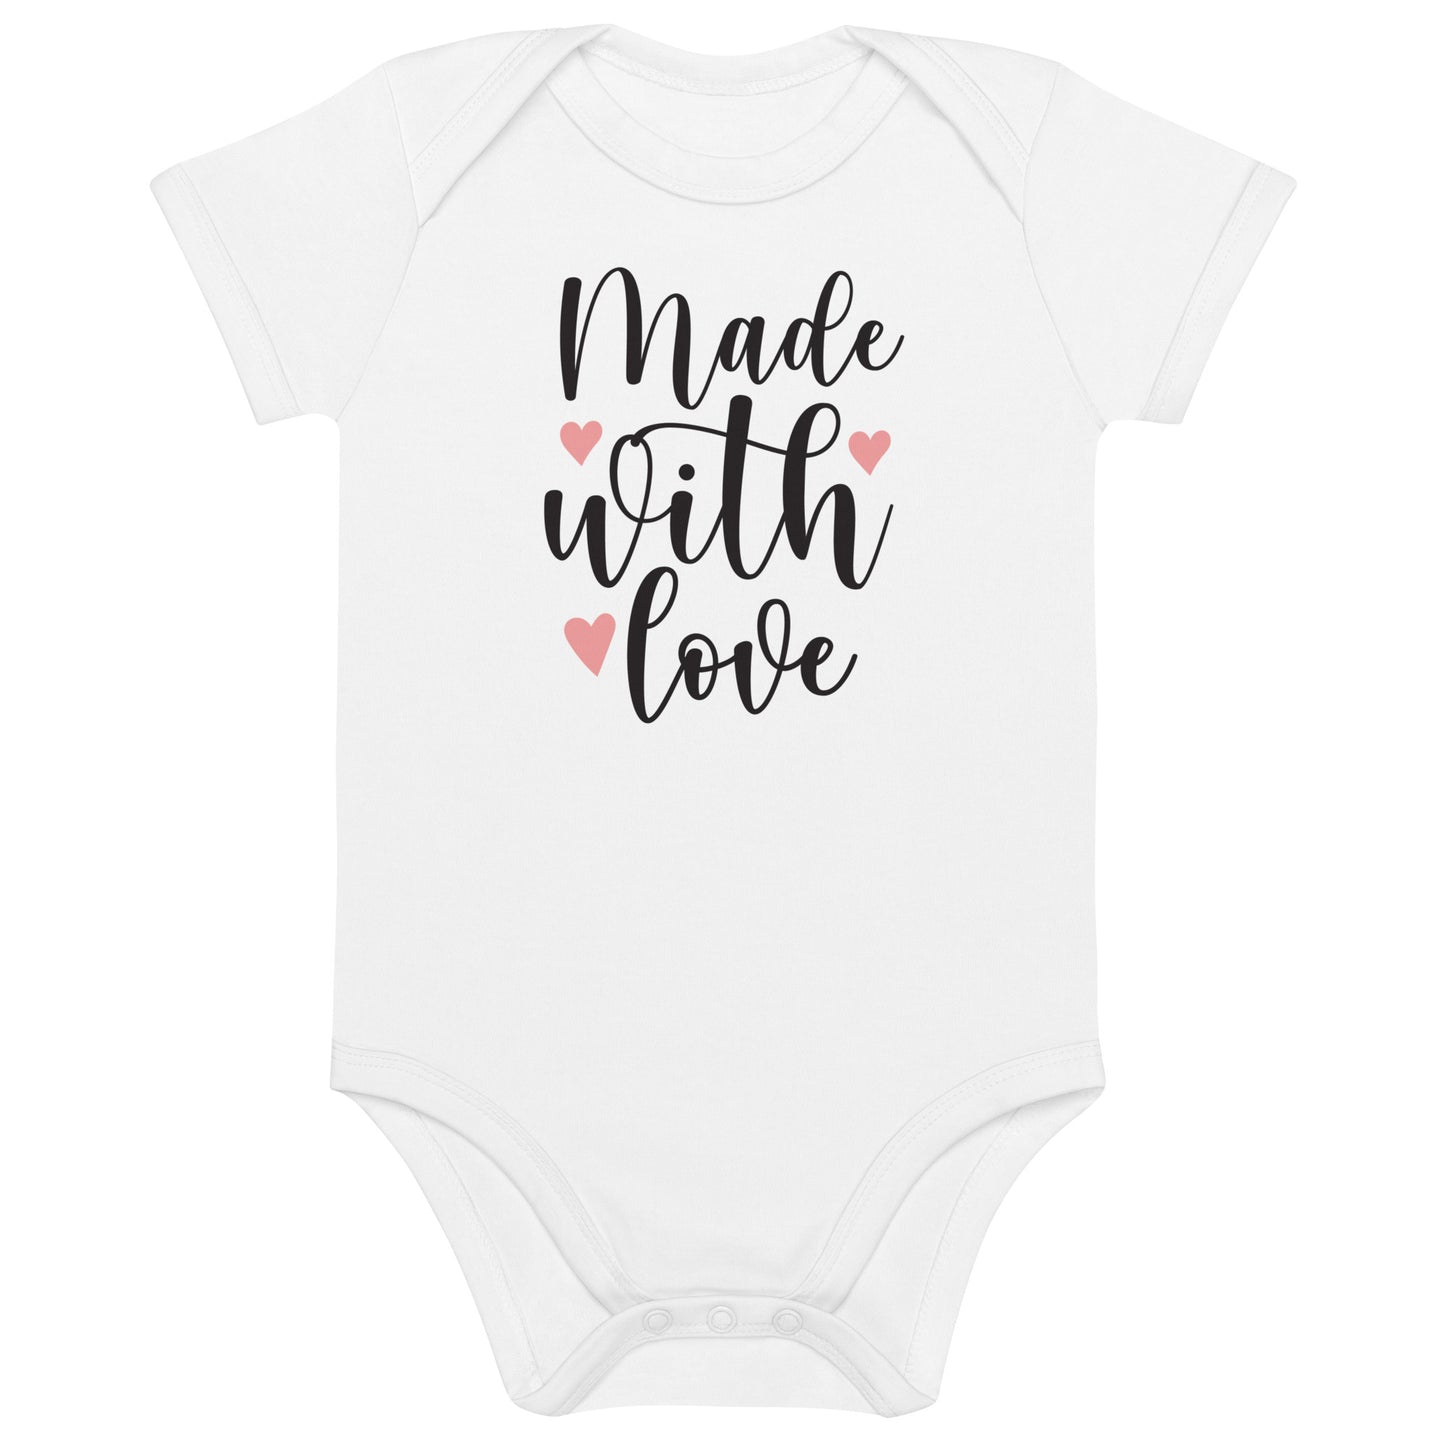 Organic cotton baby bodysuit - Made With Love